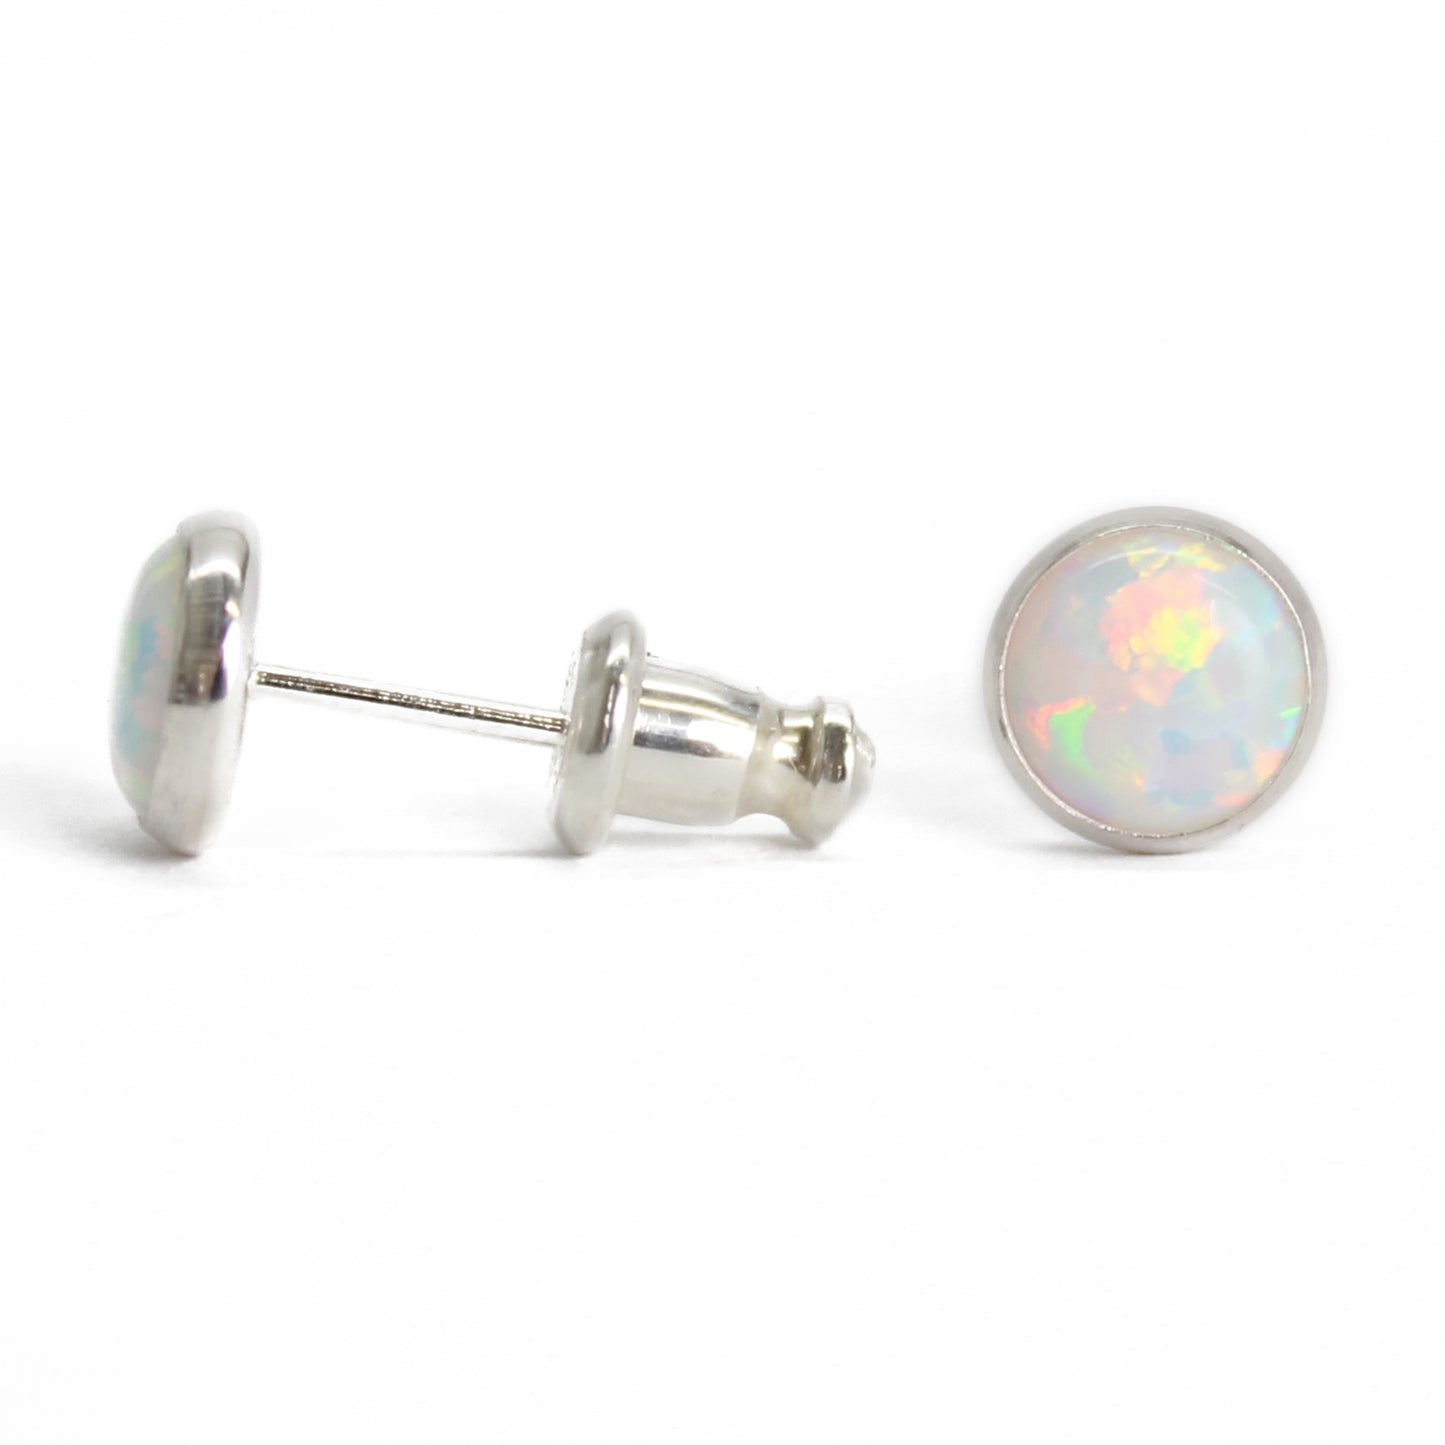 TANGPOET 4mm Tiny Opal Stud Earrings Sterling Silver Screw Back Earrings  Carnelian Abalone Shell Moonstone Turquoise Jewelry Mother's Day Gifts for